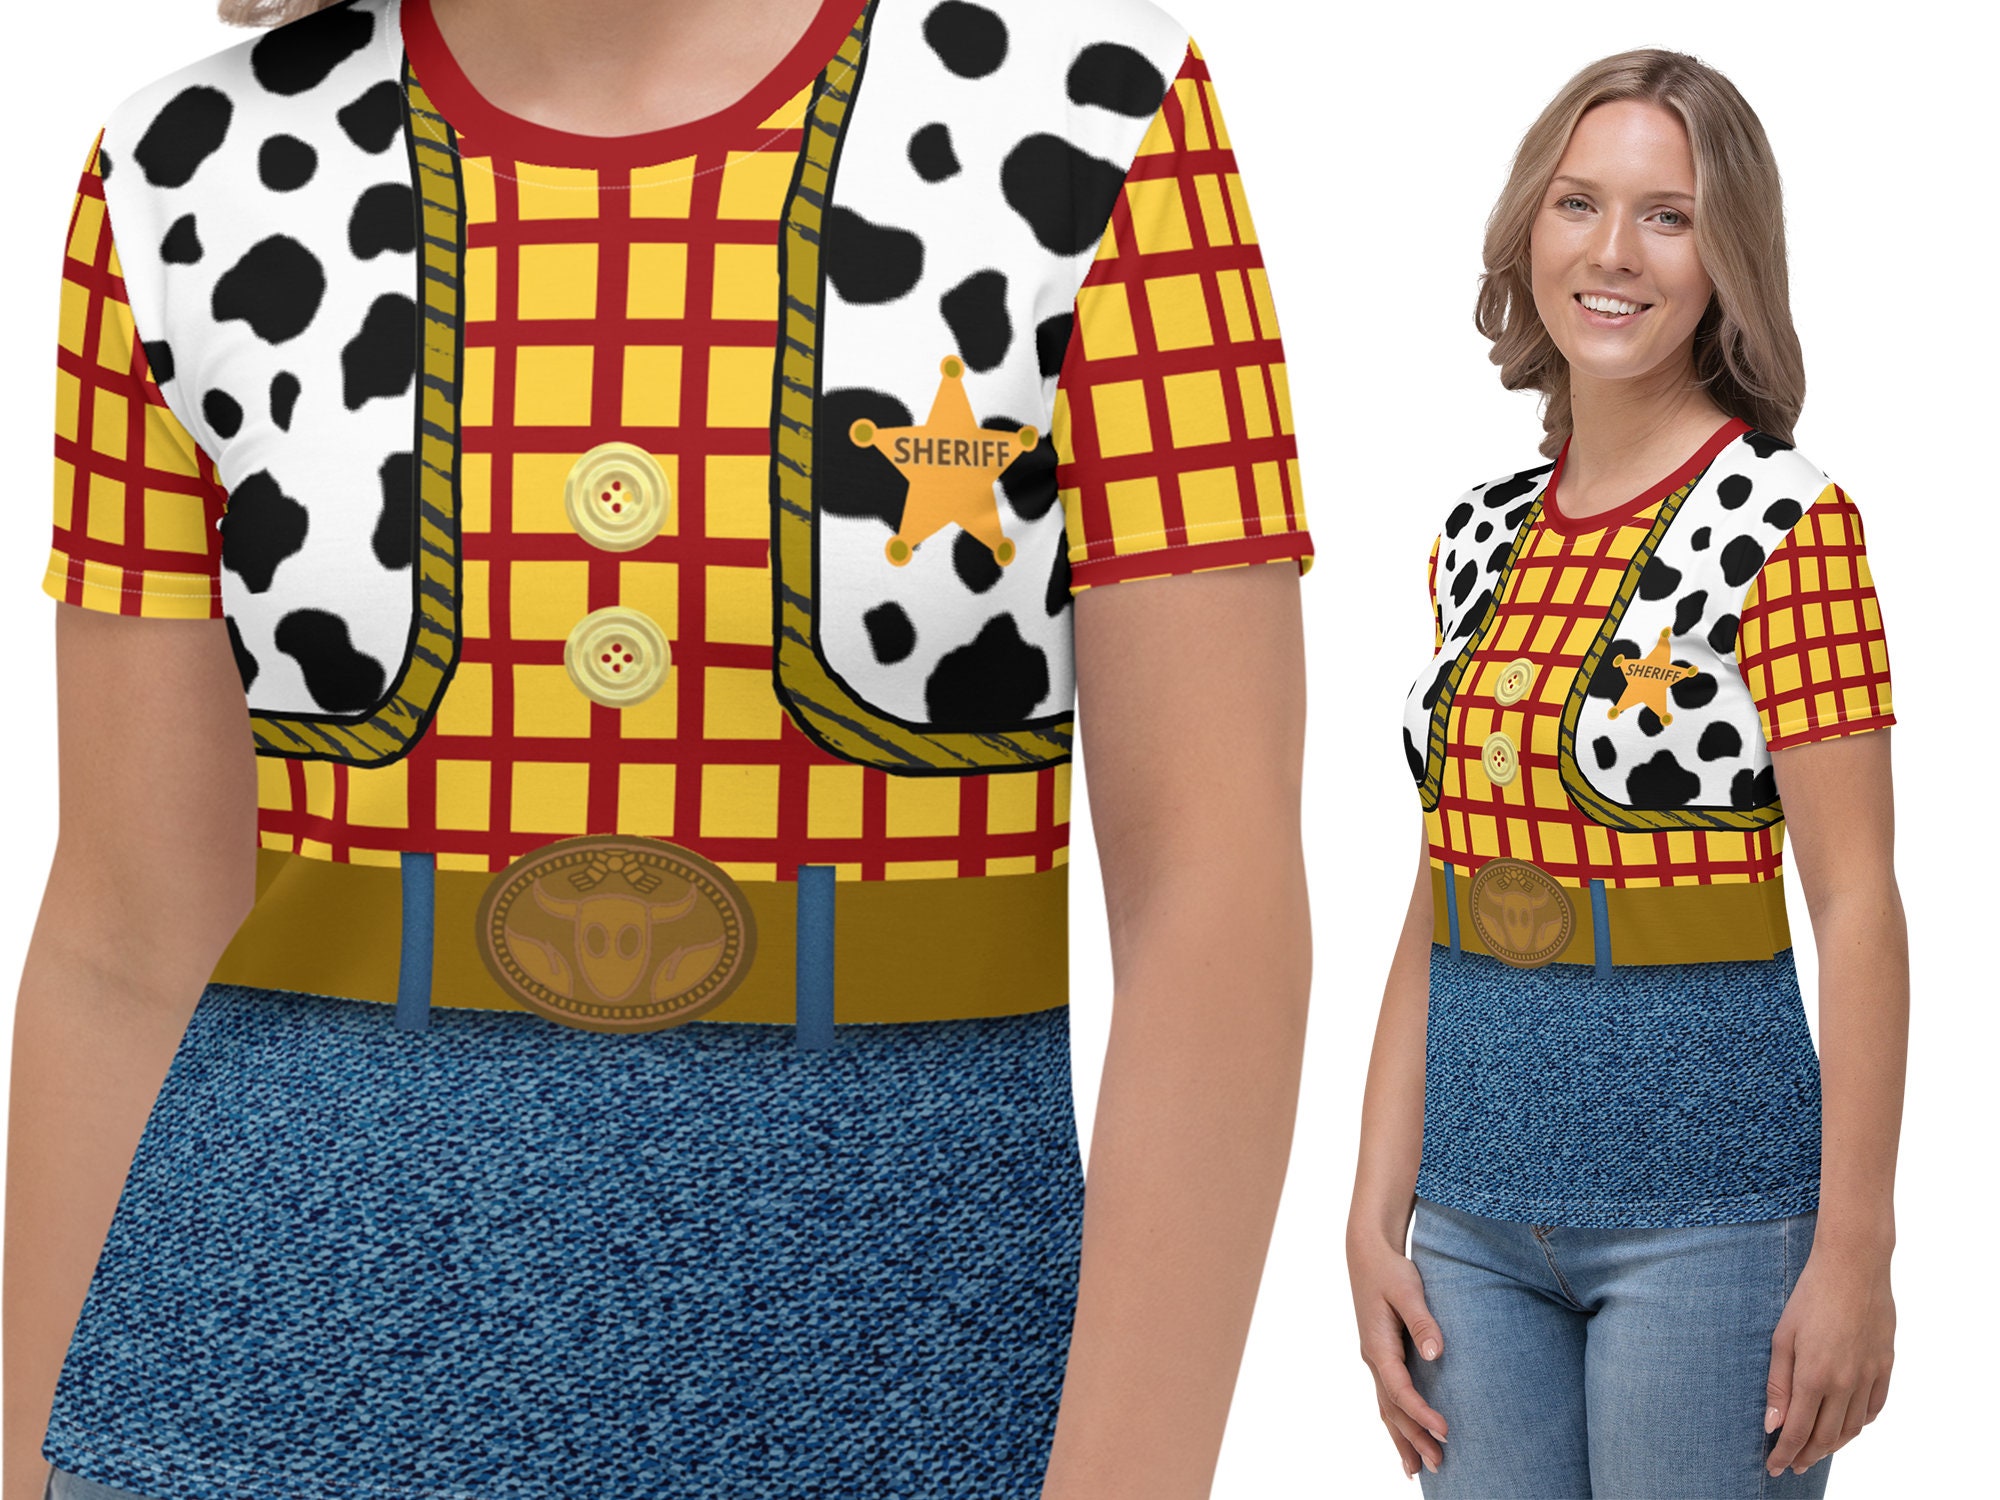 Woody Toy Story T-shirt Woman Cowboy Halloween Costume Cosplay - Etsy